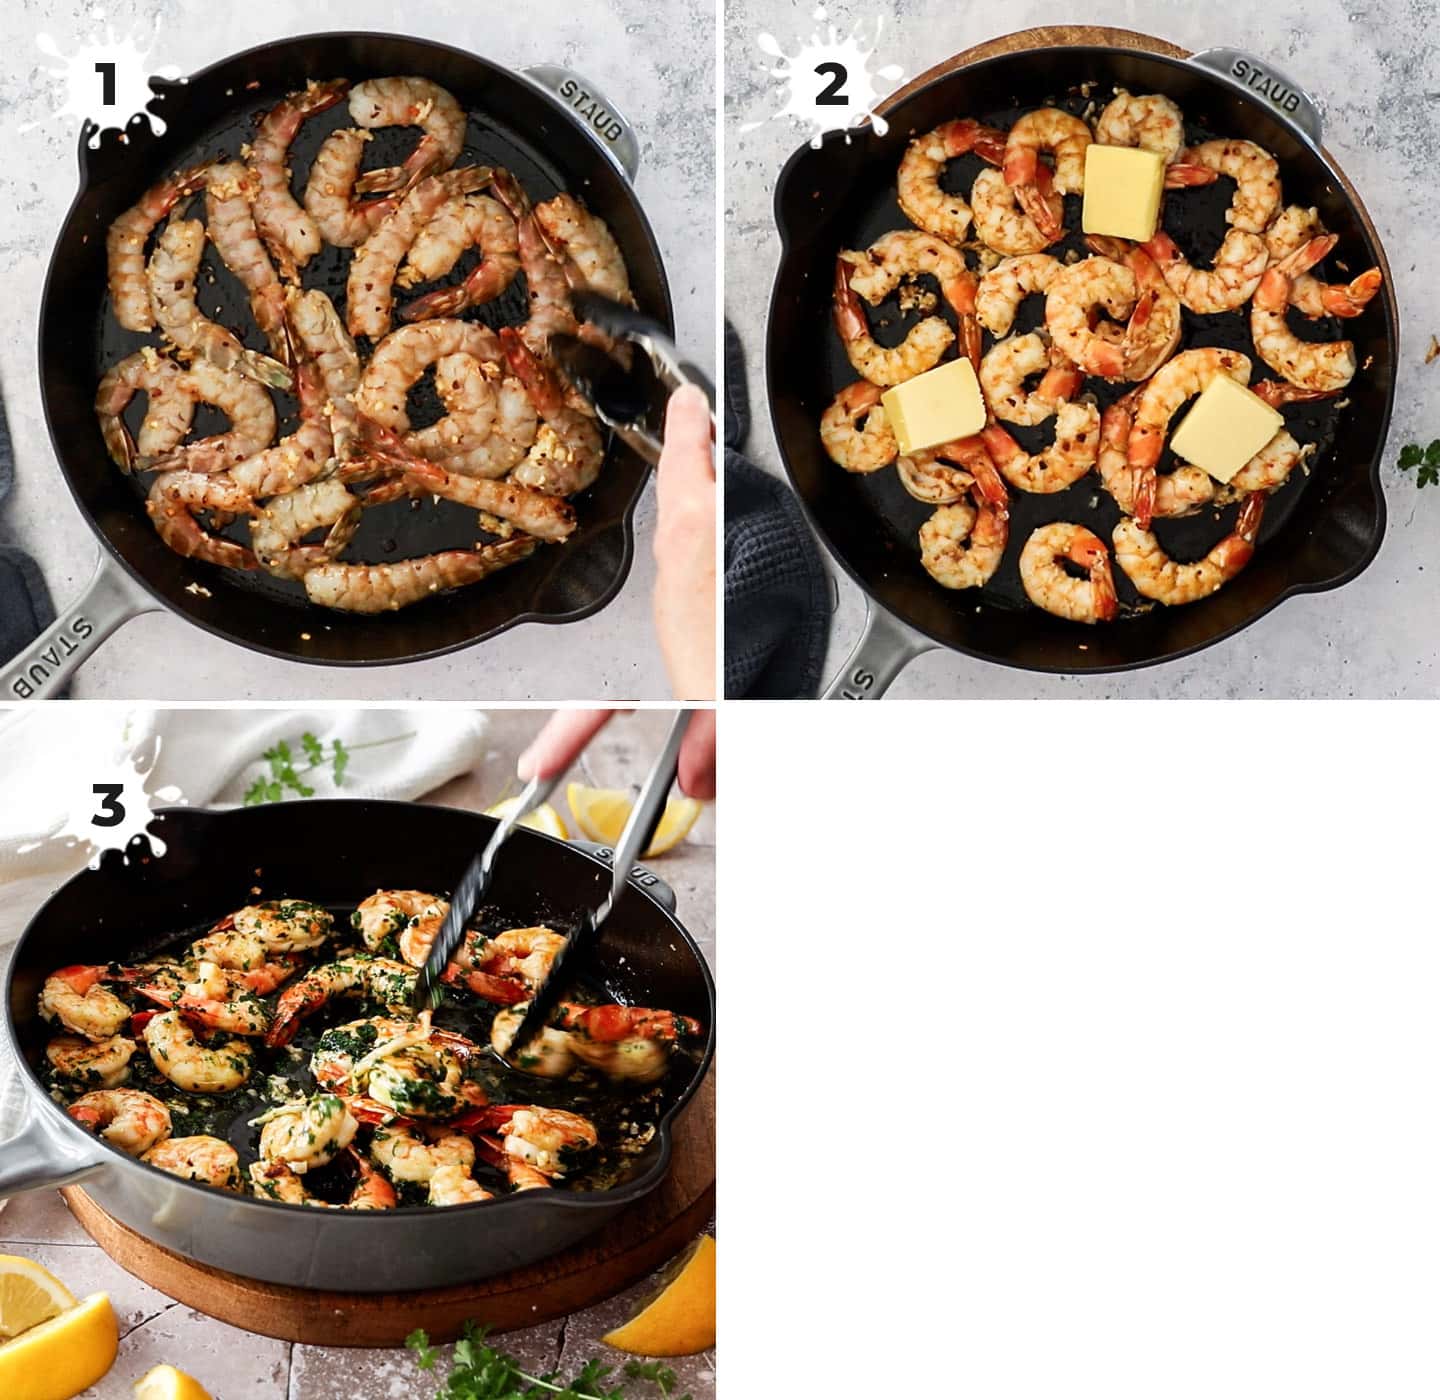 A collage showing how to prepare and cook the prawns.